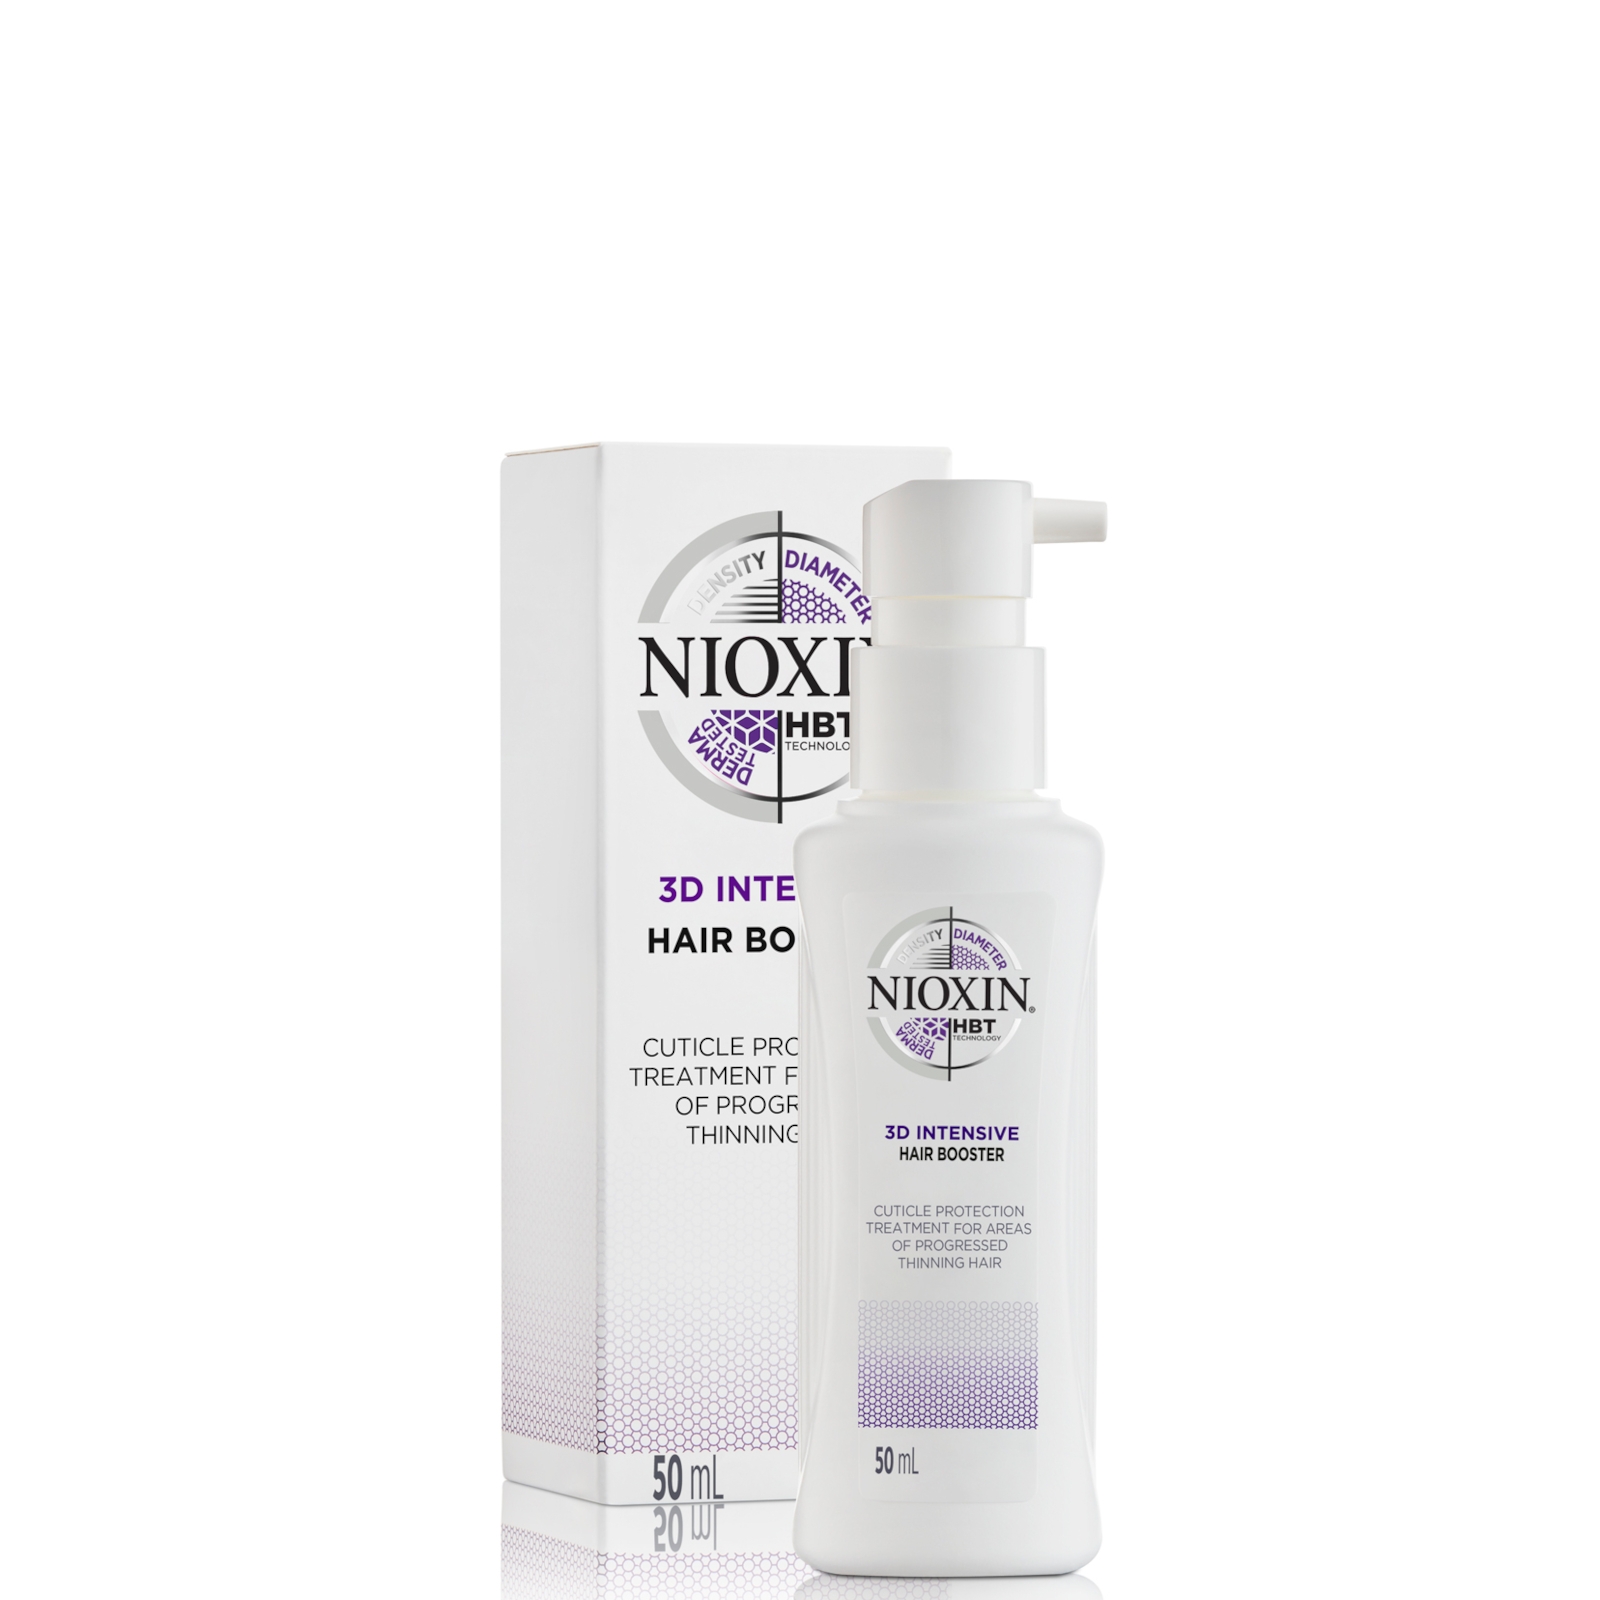 Nioxin Hair Booster, Cuticle Protection Treatment for Progressed Thinning Hair, 50ml